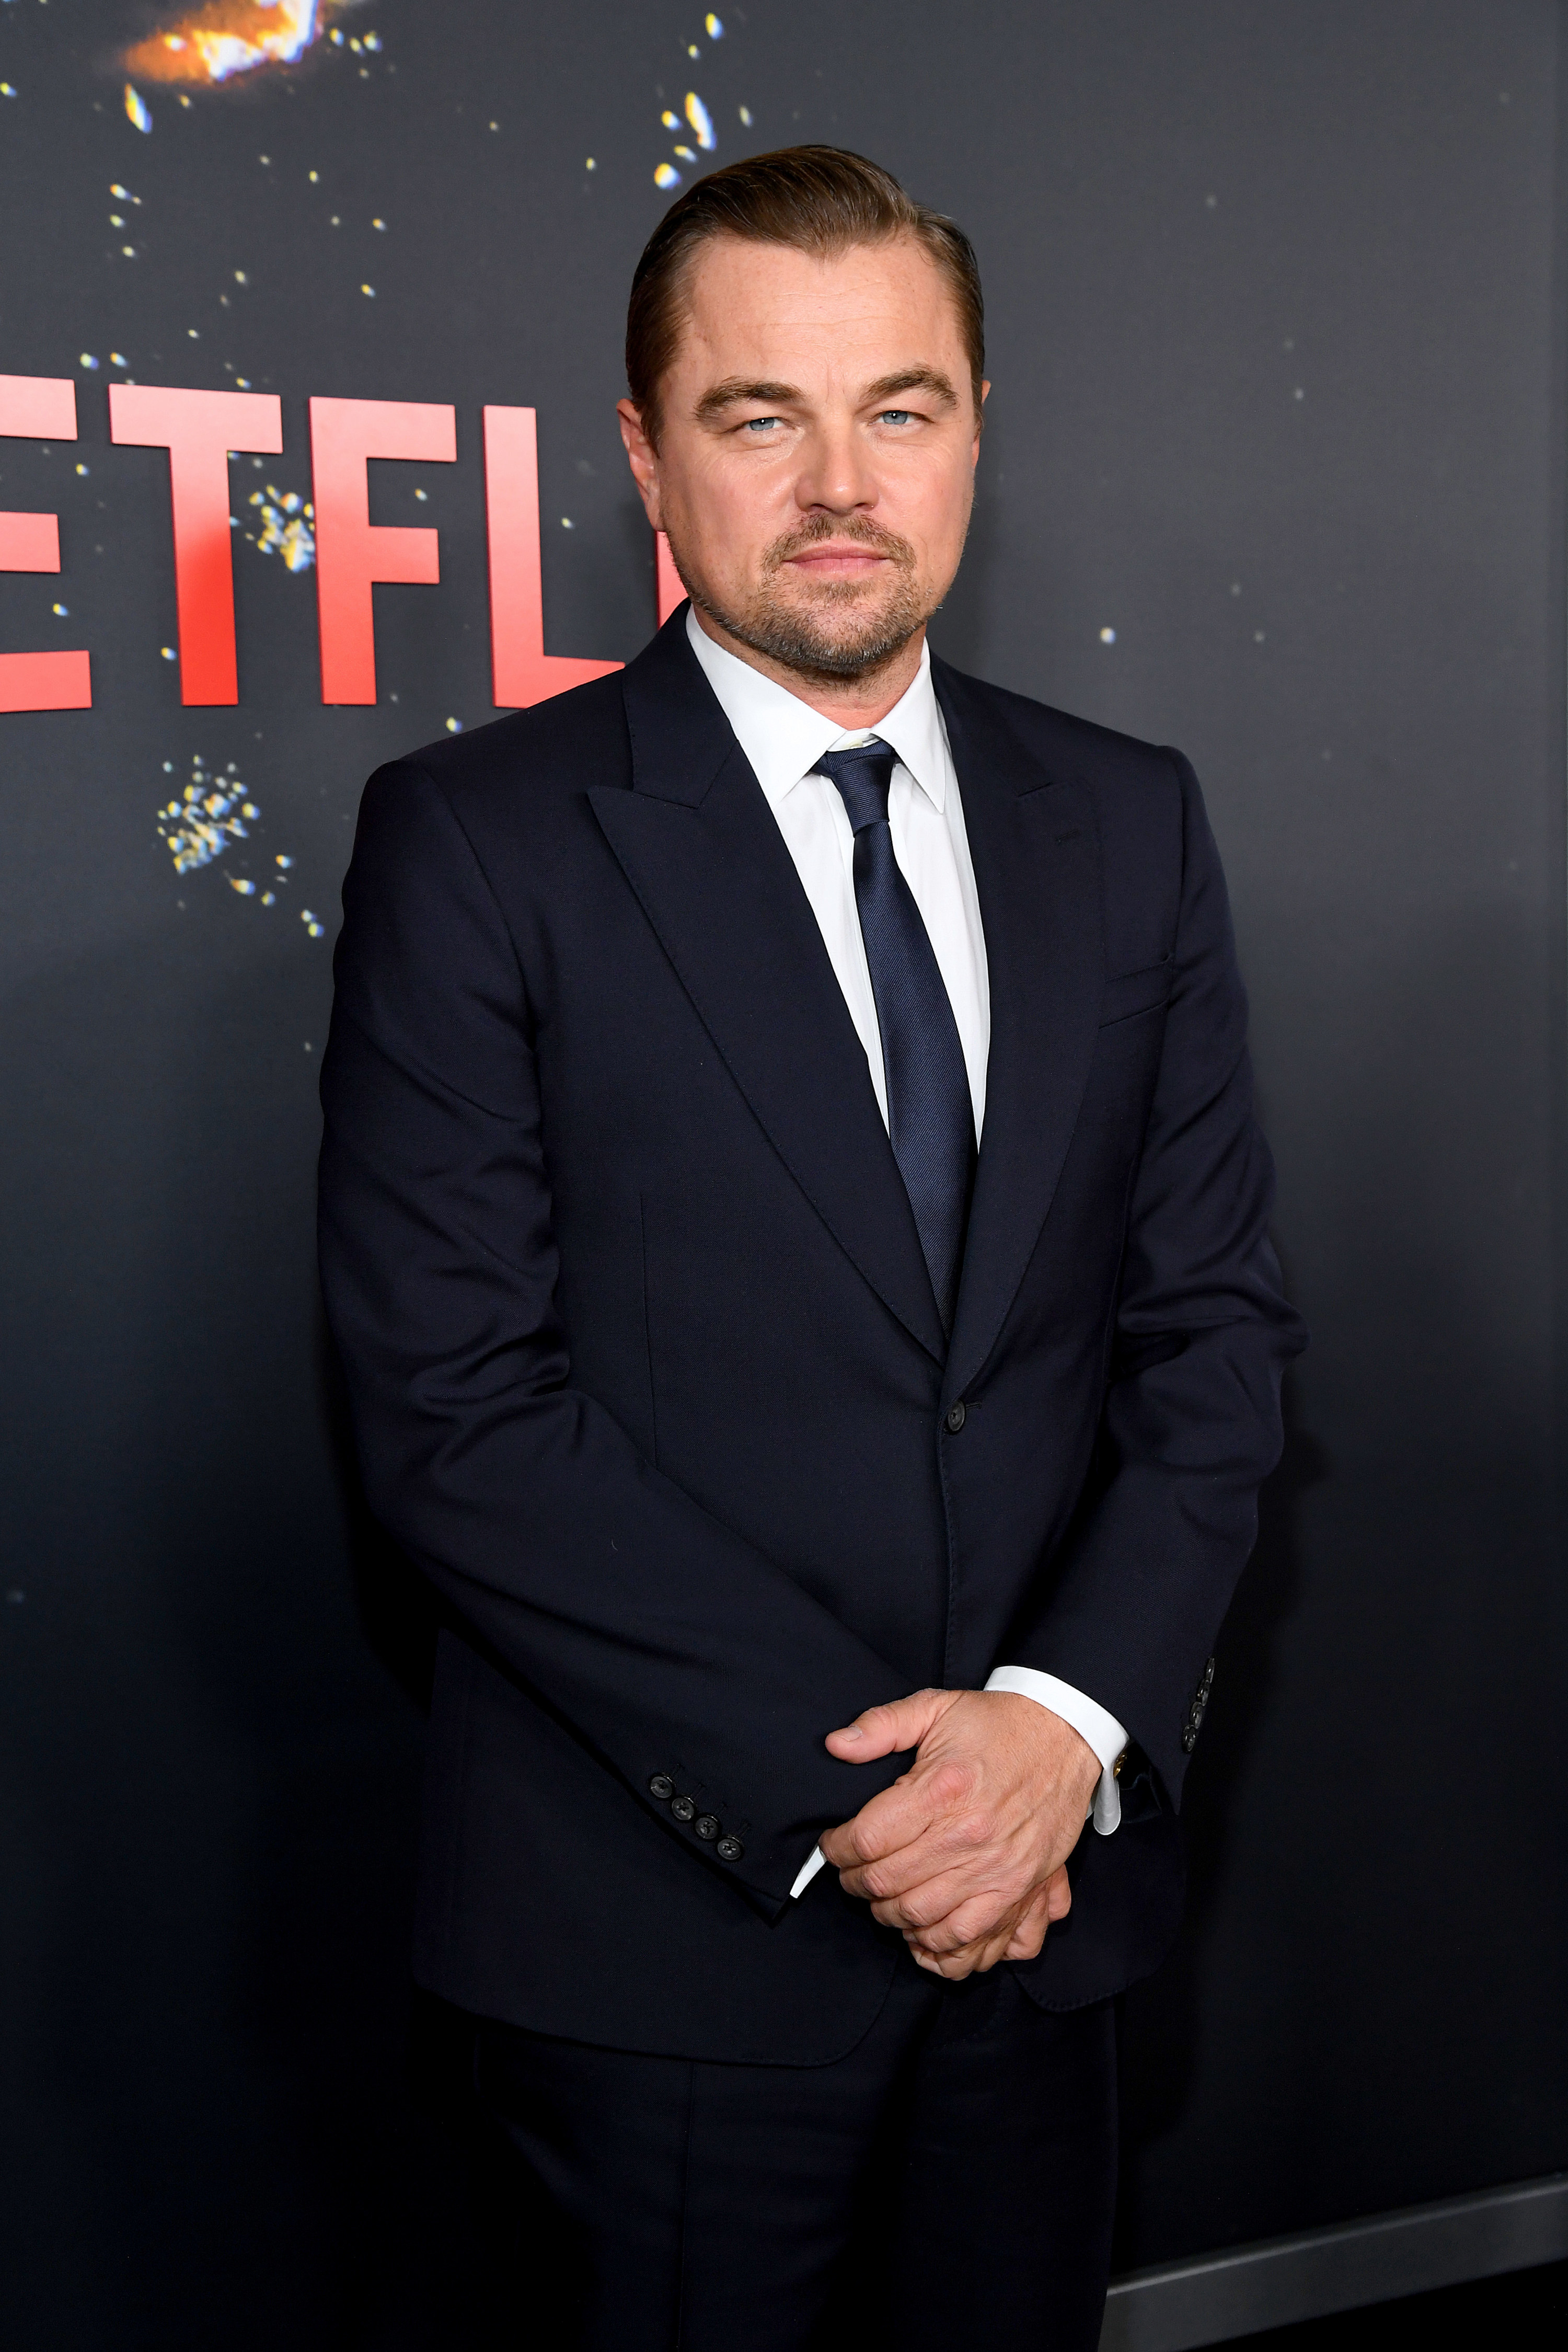 Leonardo DiCaprio at a movie premiere wearing a suit